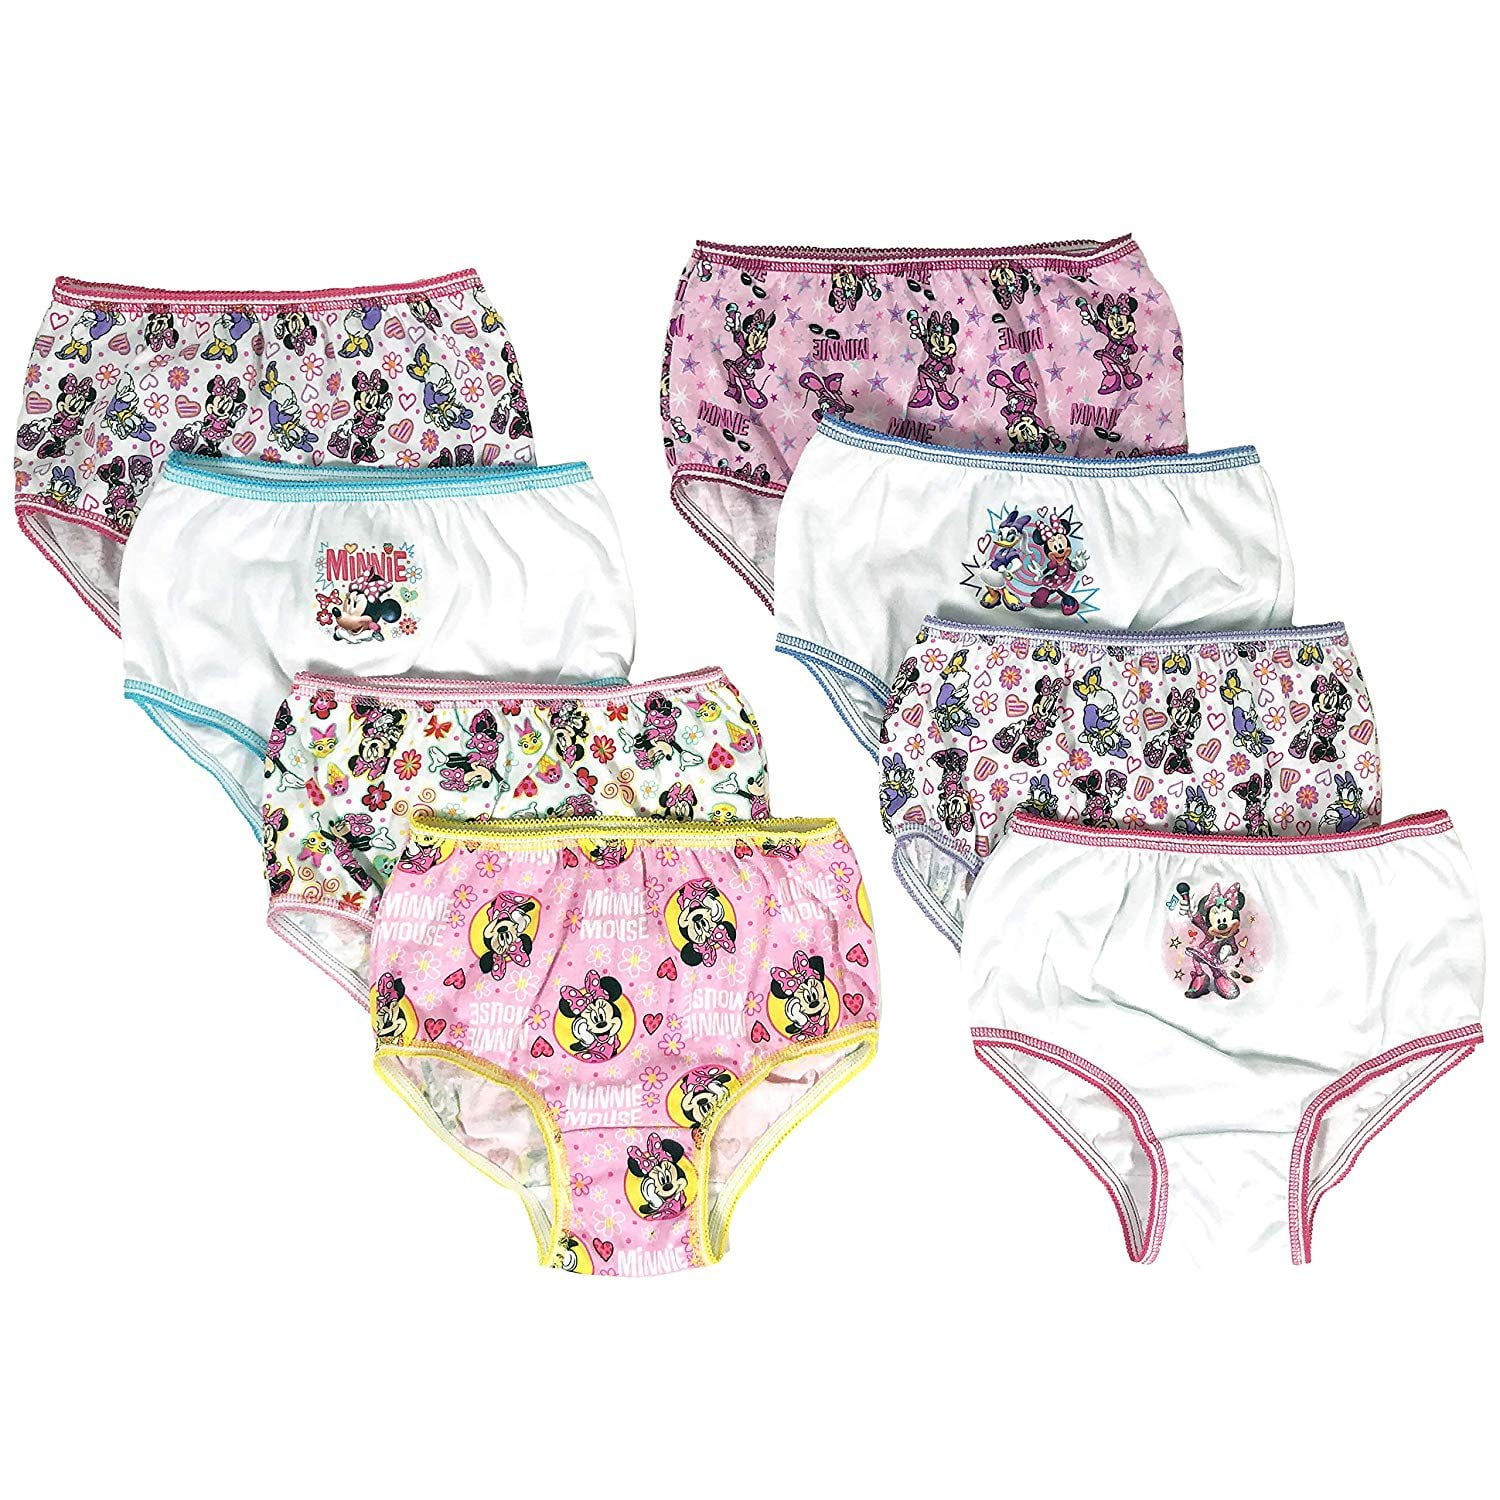 Chili Peppers Pack of 20 Bikini Underwear for Girls Panties for Kids, Sizes  4-14 